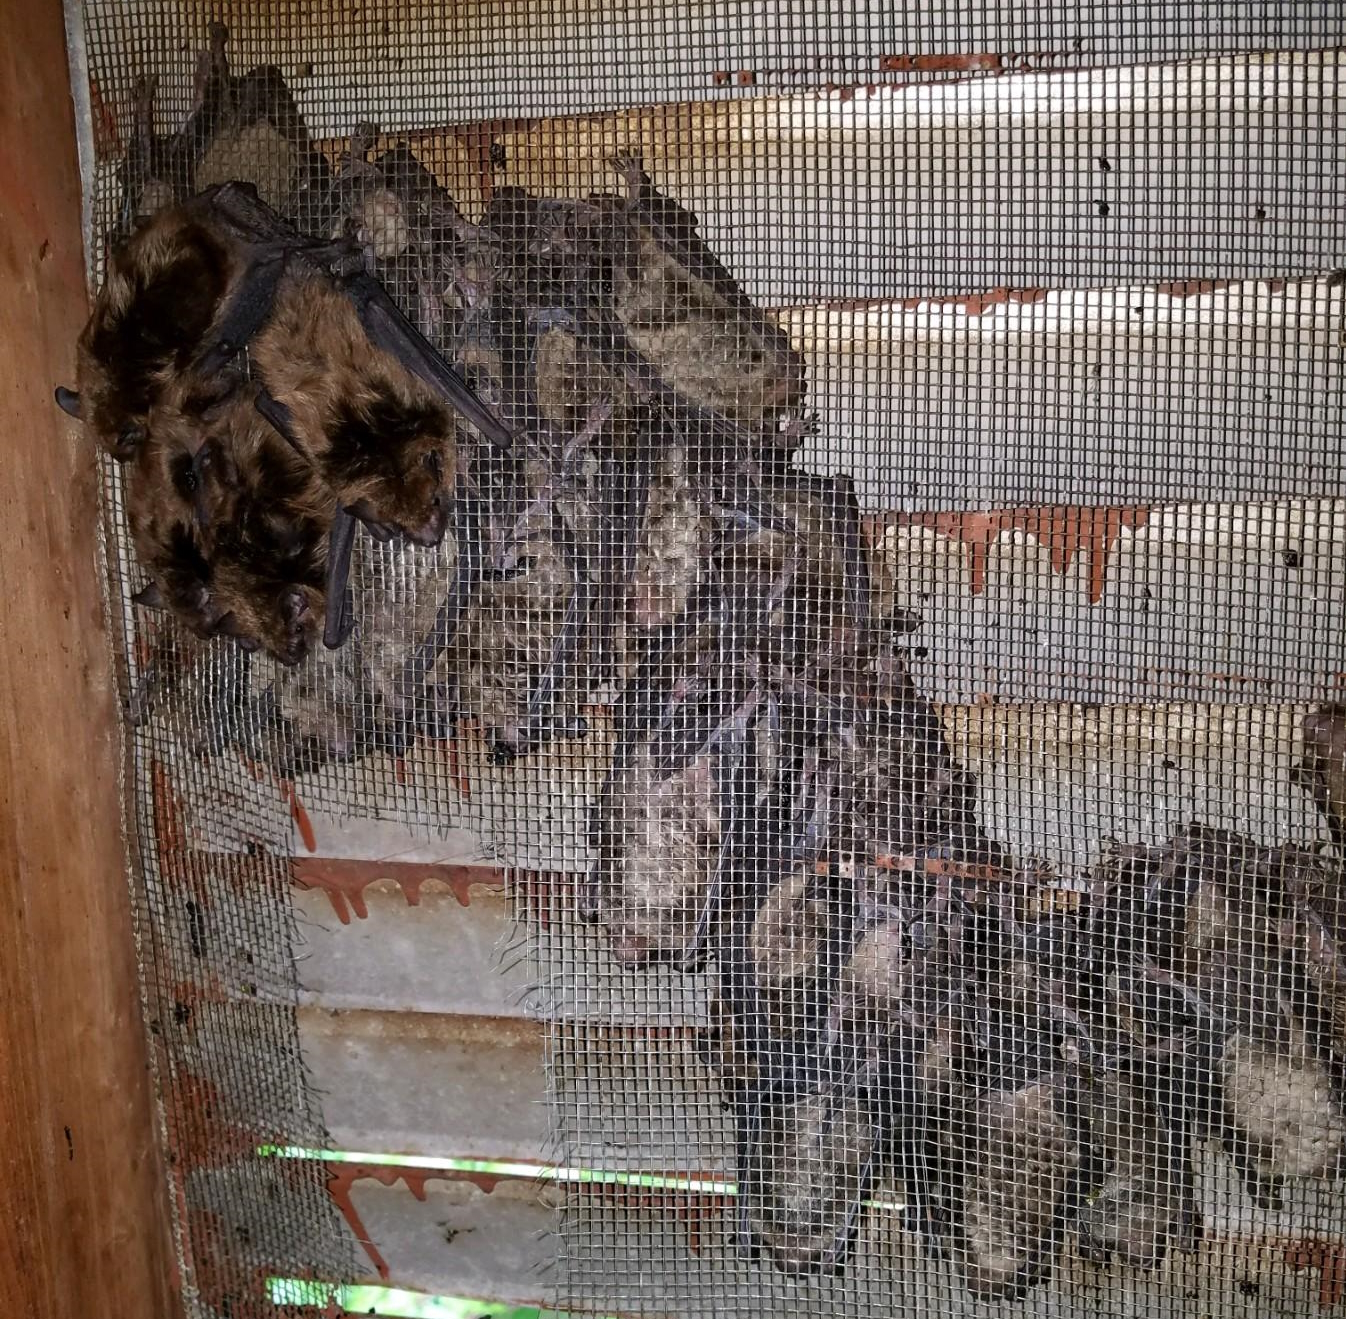 Indiana Bats In The Attic